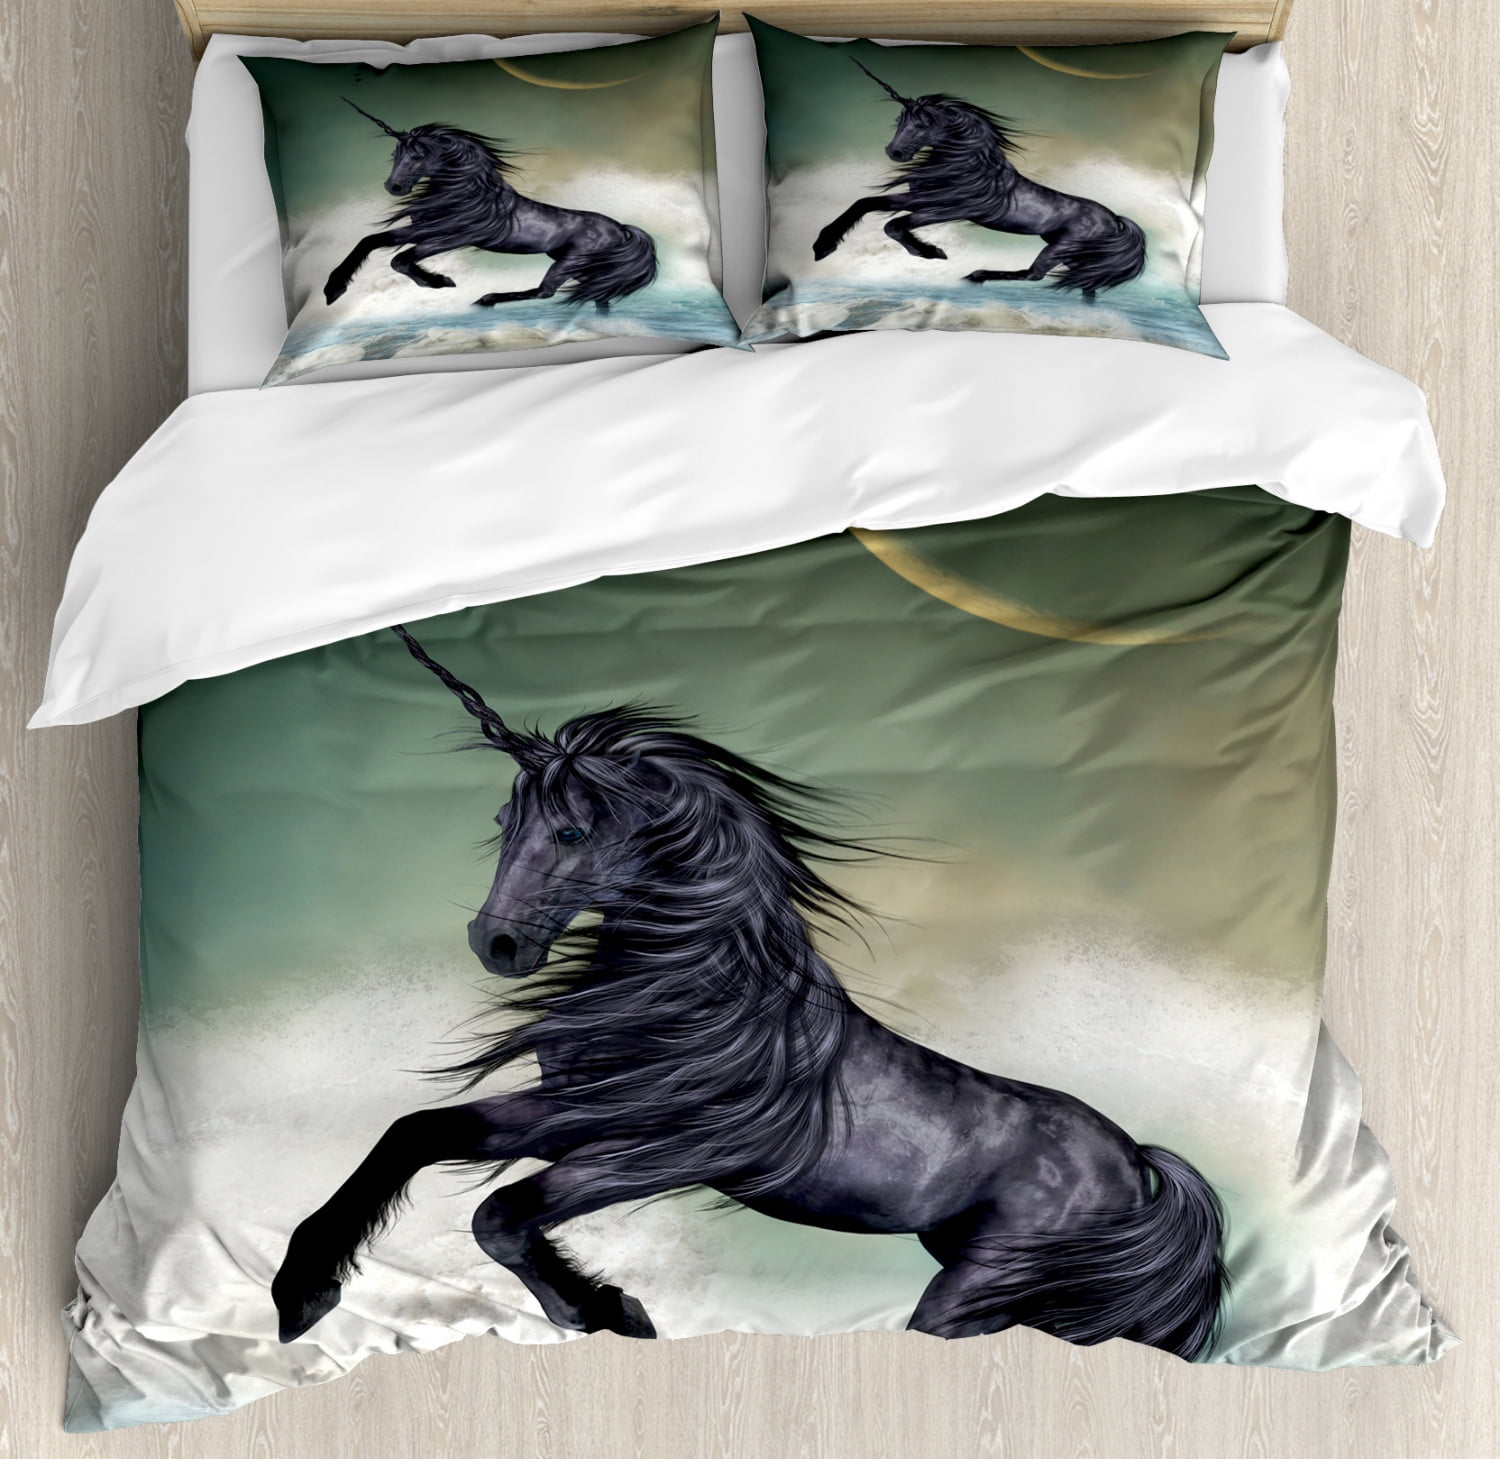 Fantasy Duvet Cover Set Black Unicorn In The Ocean With Moon Abstract Mythical Creatures Hand Drawn Design Decorative Bedding Set With Pillow Shams Multicolor By Ambesonne Walmart Com Walmart Com